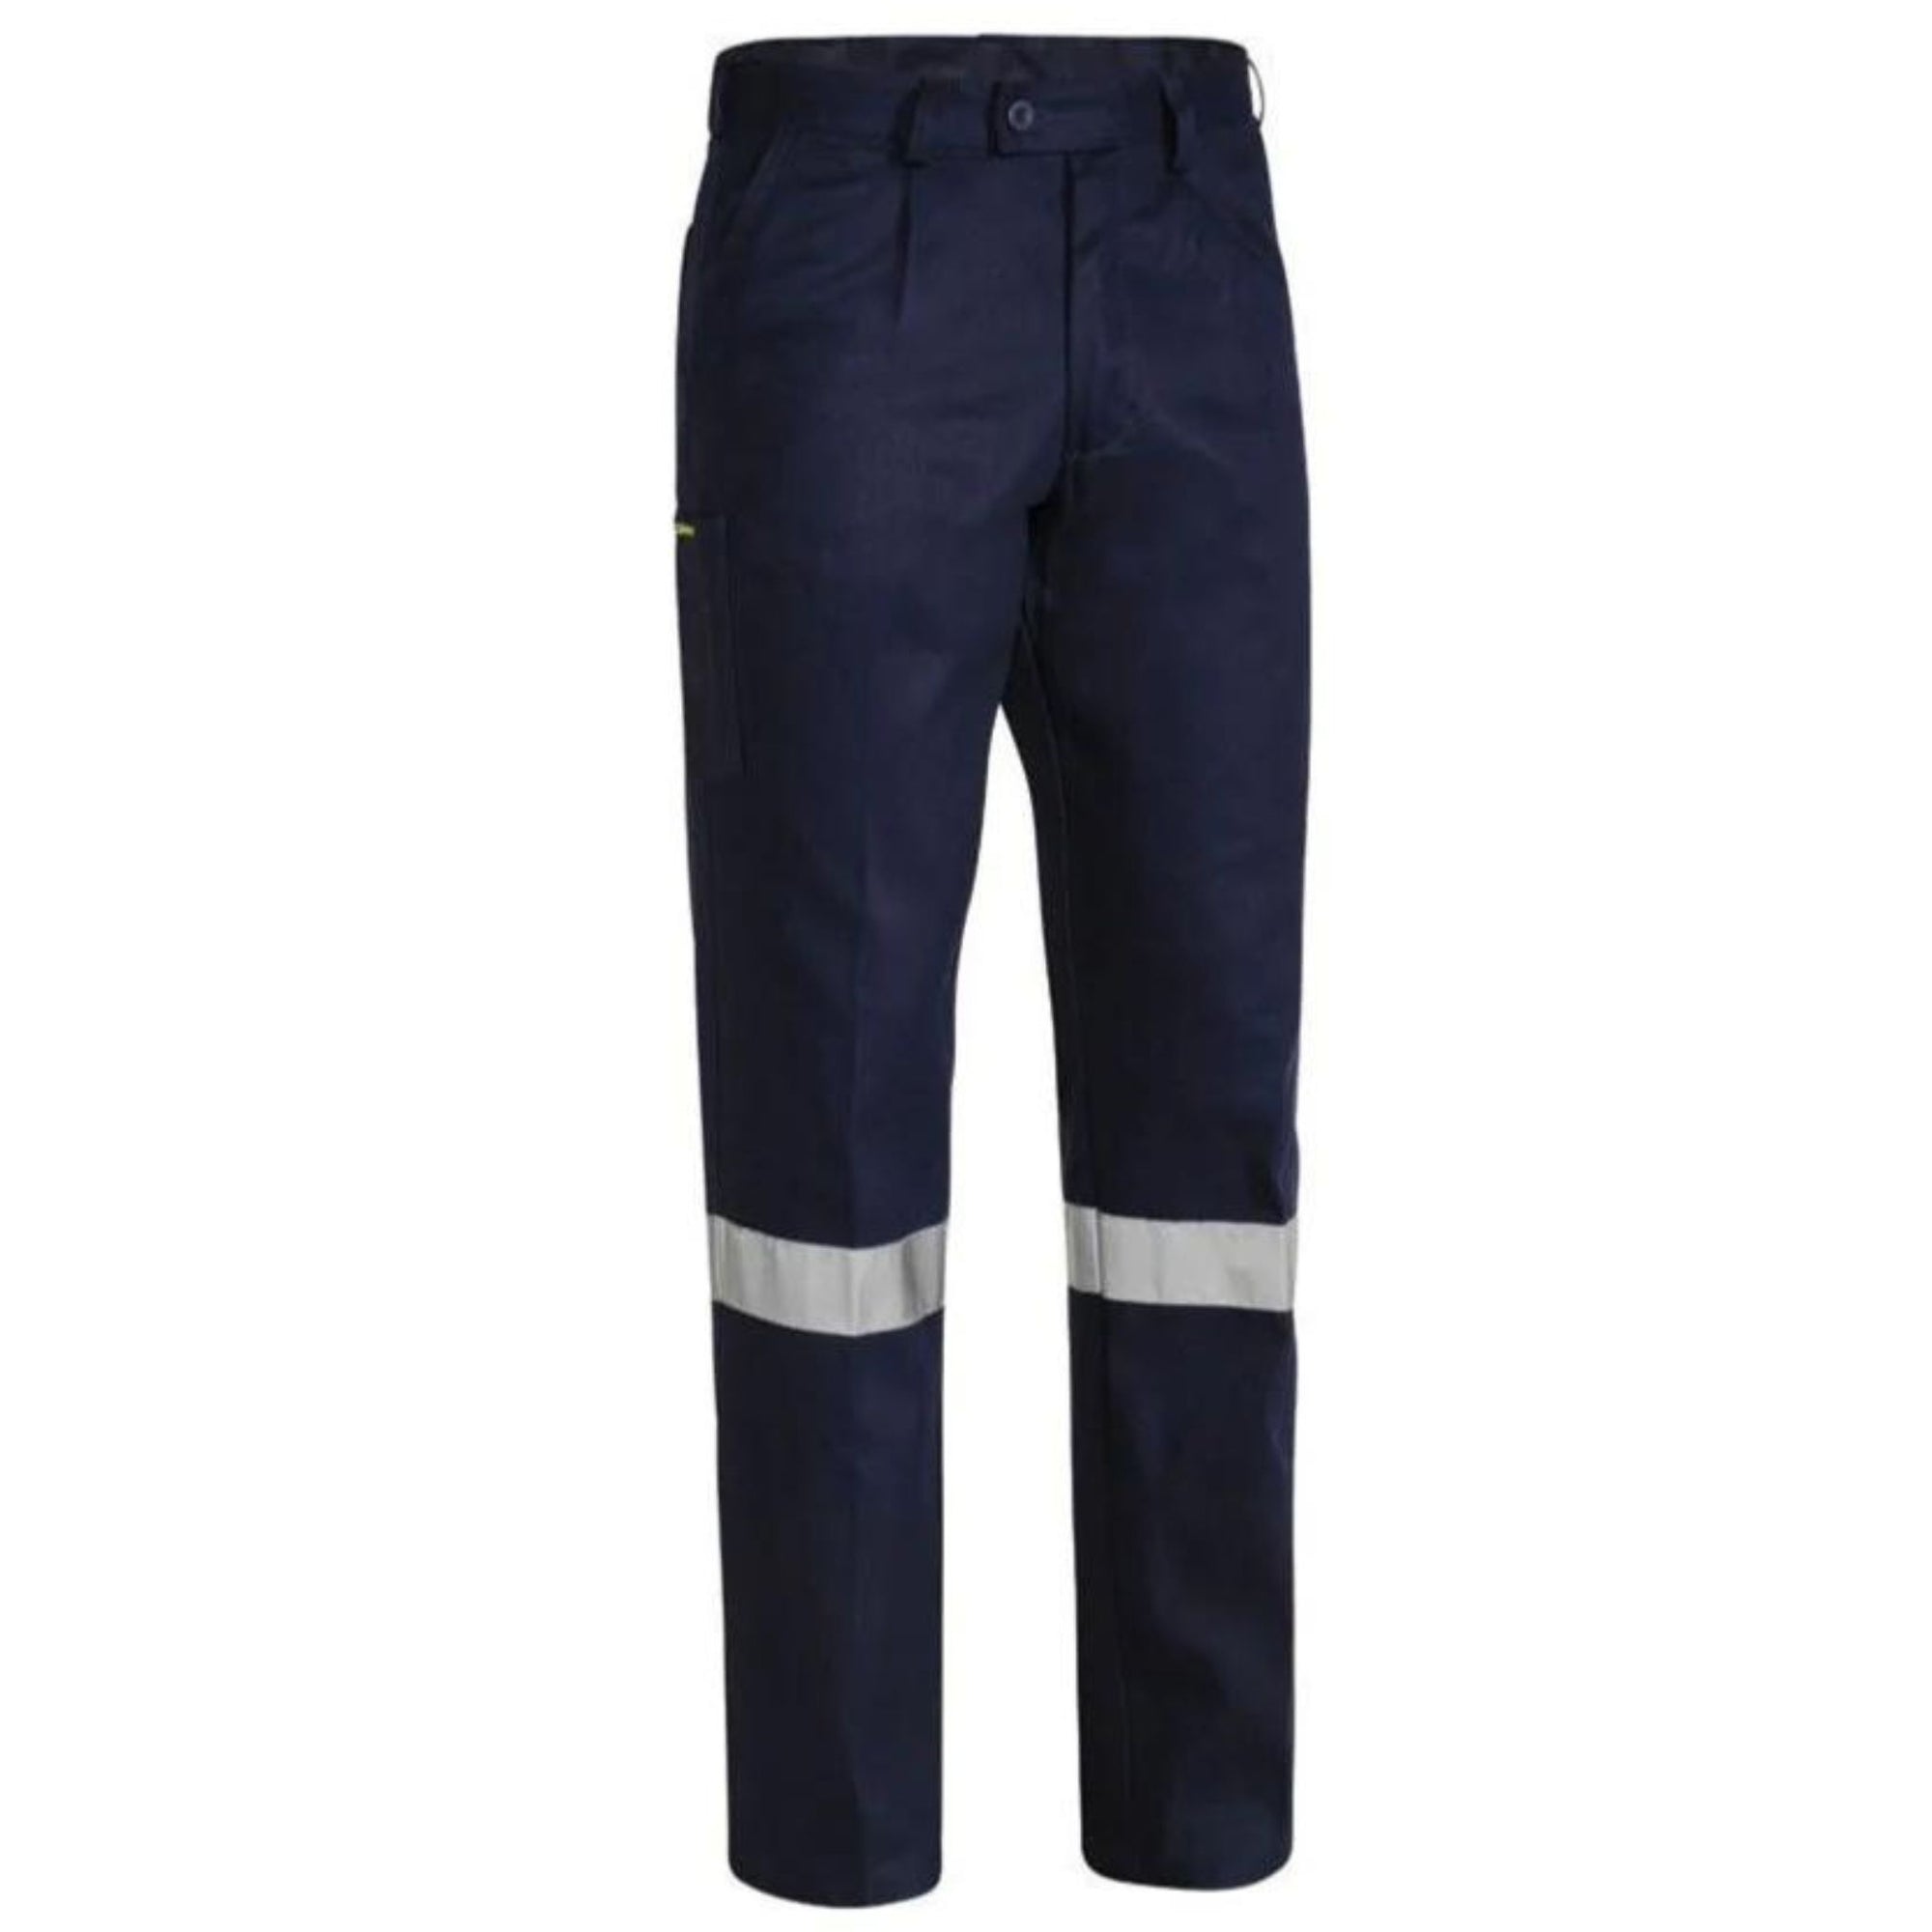 Cotton Drill Taped Work Pants - South East Clearance Centre